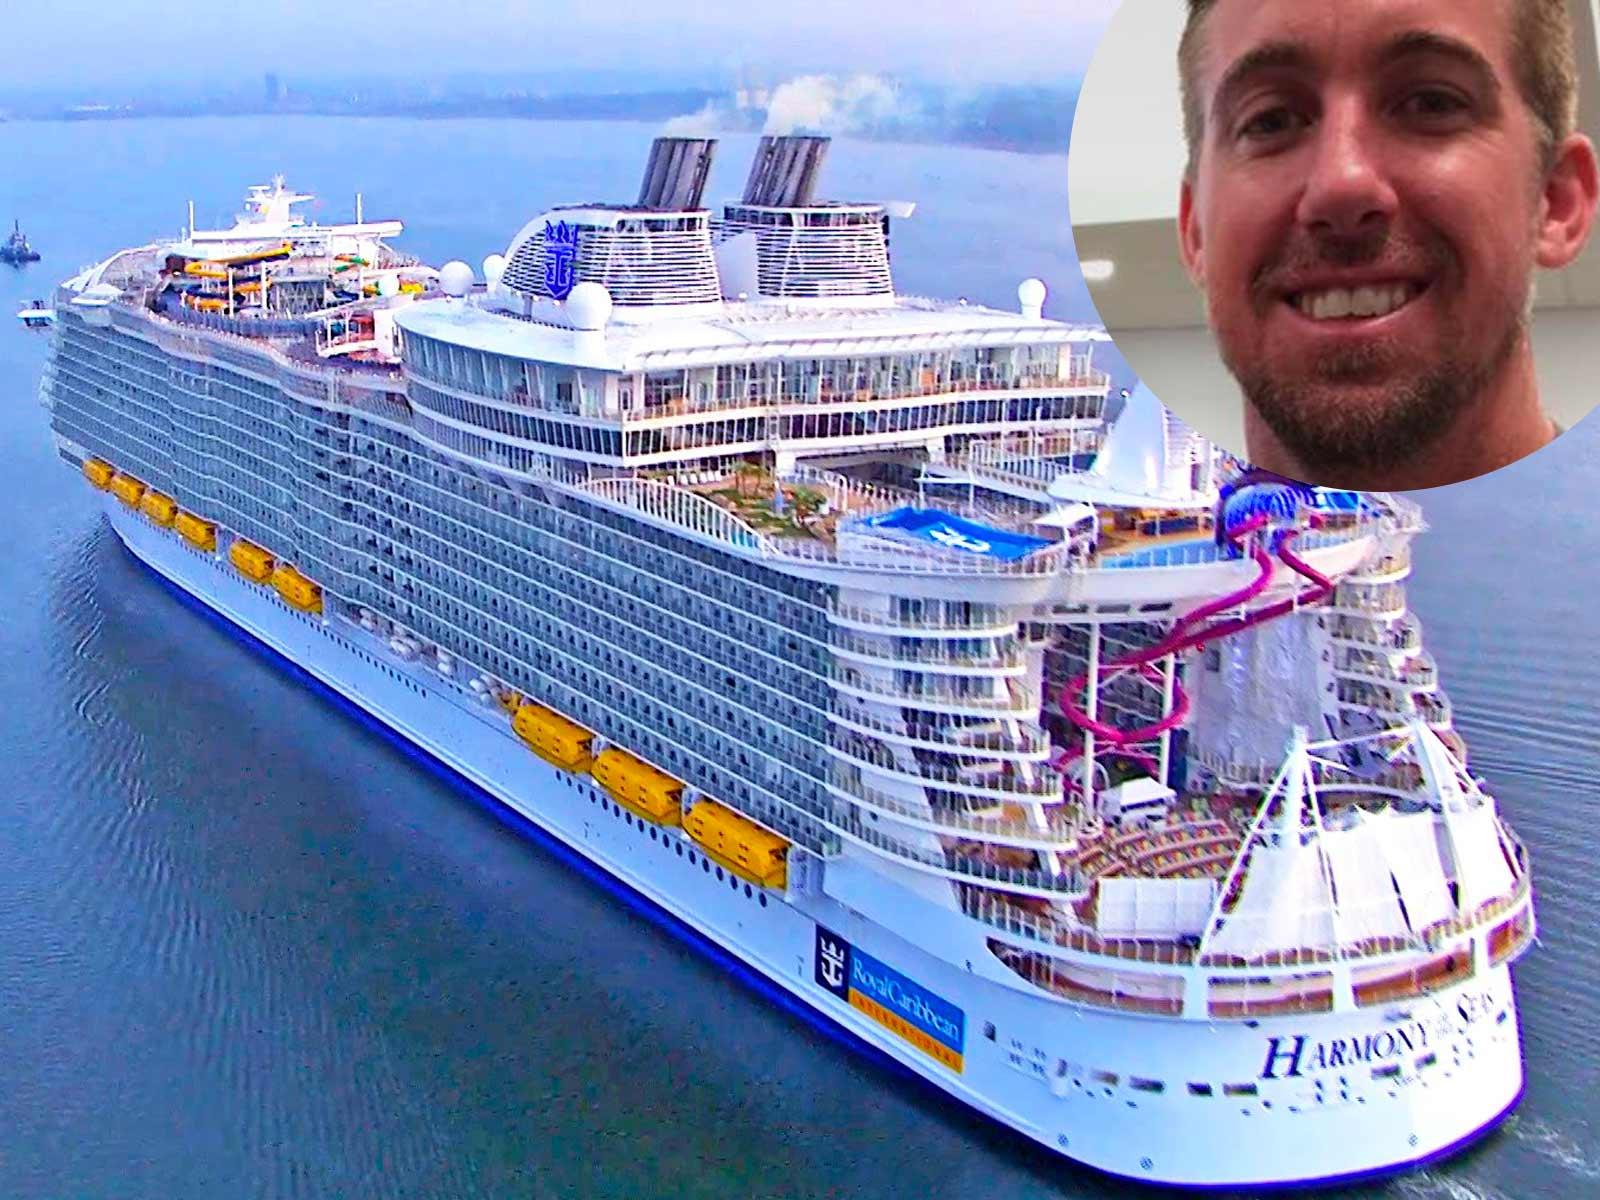 ‘Storm Chasers’ Star’s Cruise Ship Passengers Busted for Ecstasy & Ketamine While Boarding